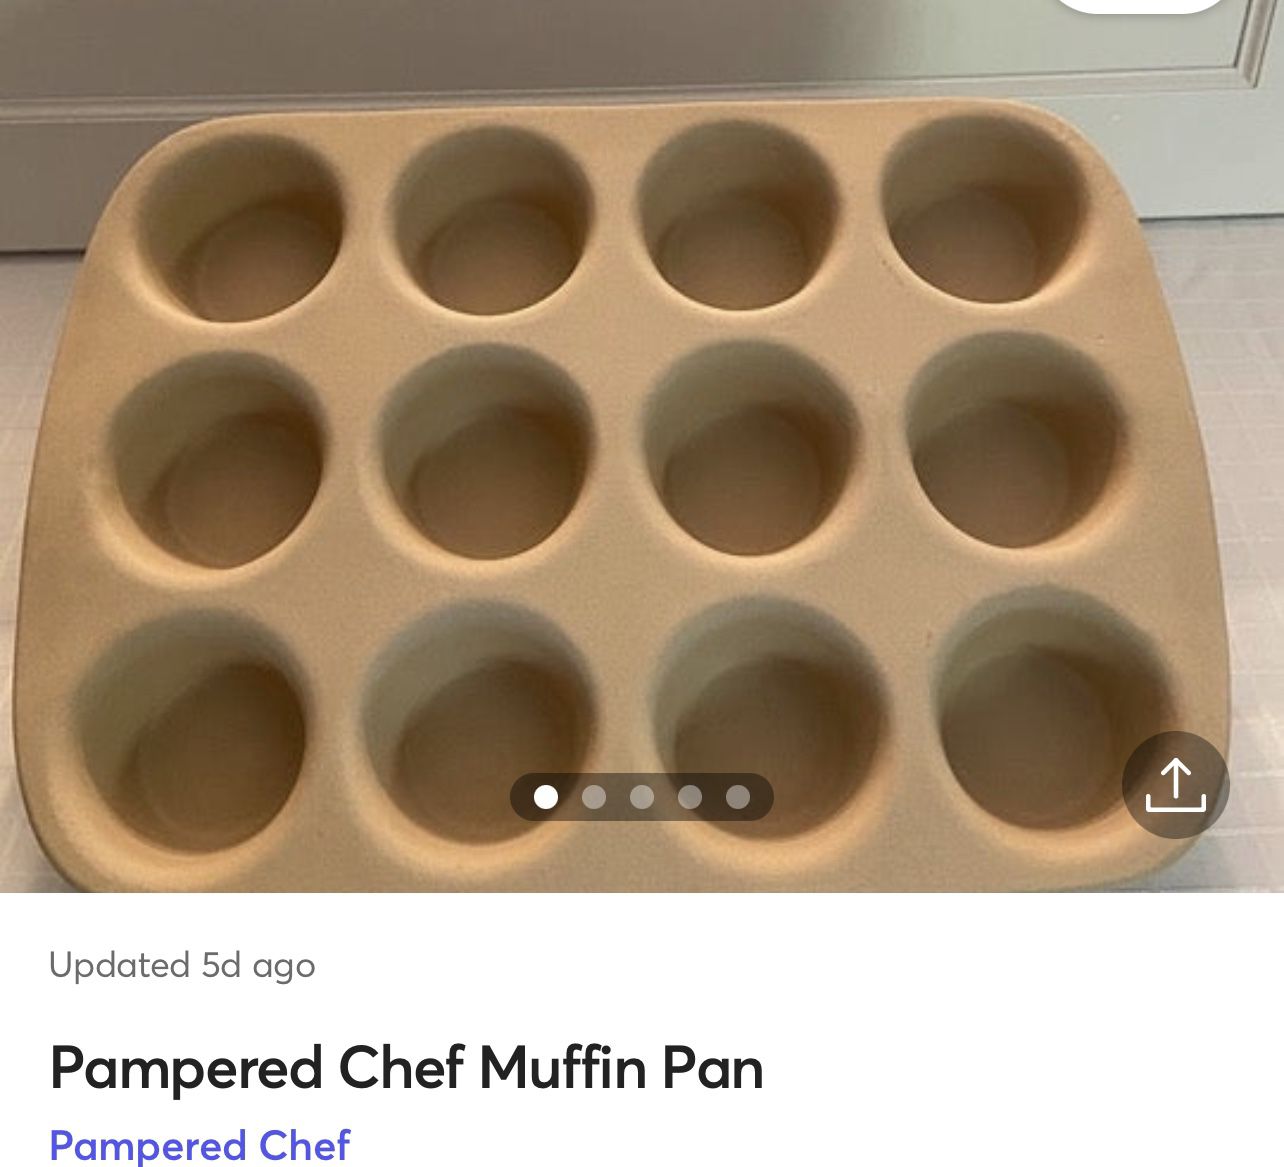 The Pampered Chef’s Muffin Pan 